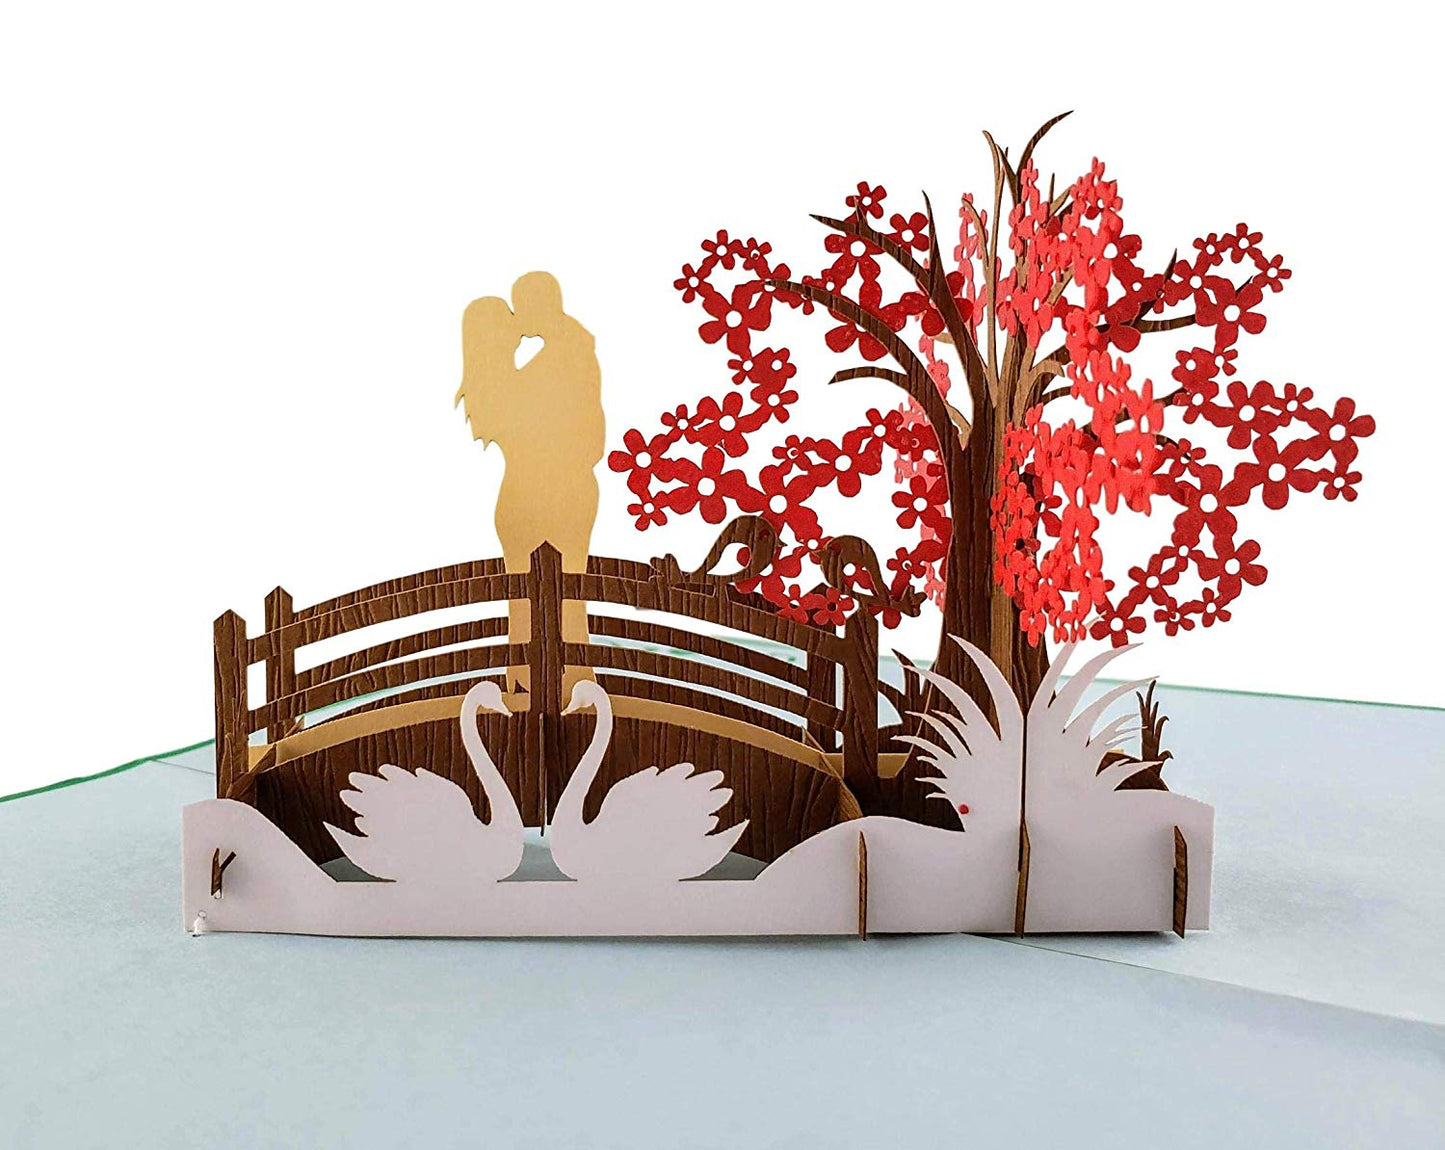 Happy 1st Anniversary 3D Pop Up Greeting Card - 1st Wedding Anniversary - Anniversary - Love - Weddi - iGifts And Cards